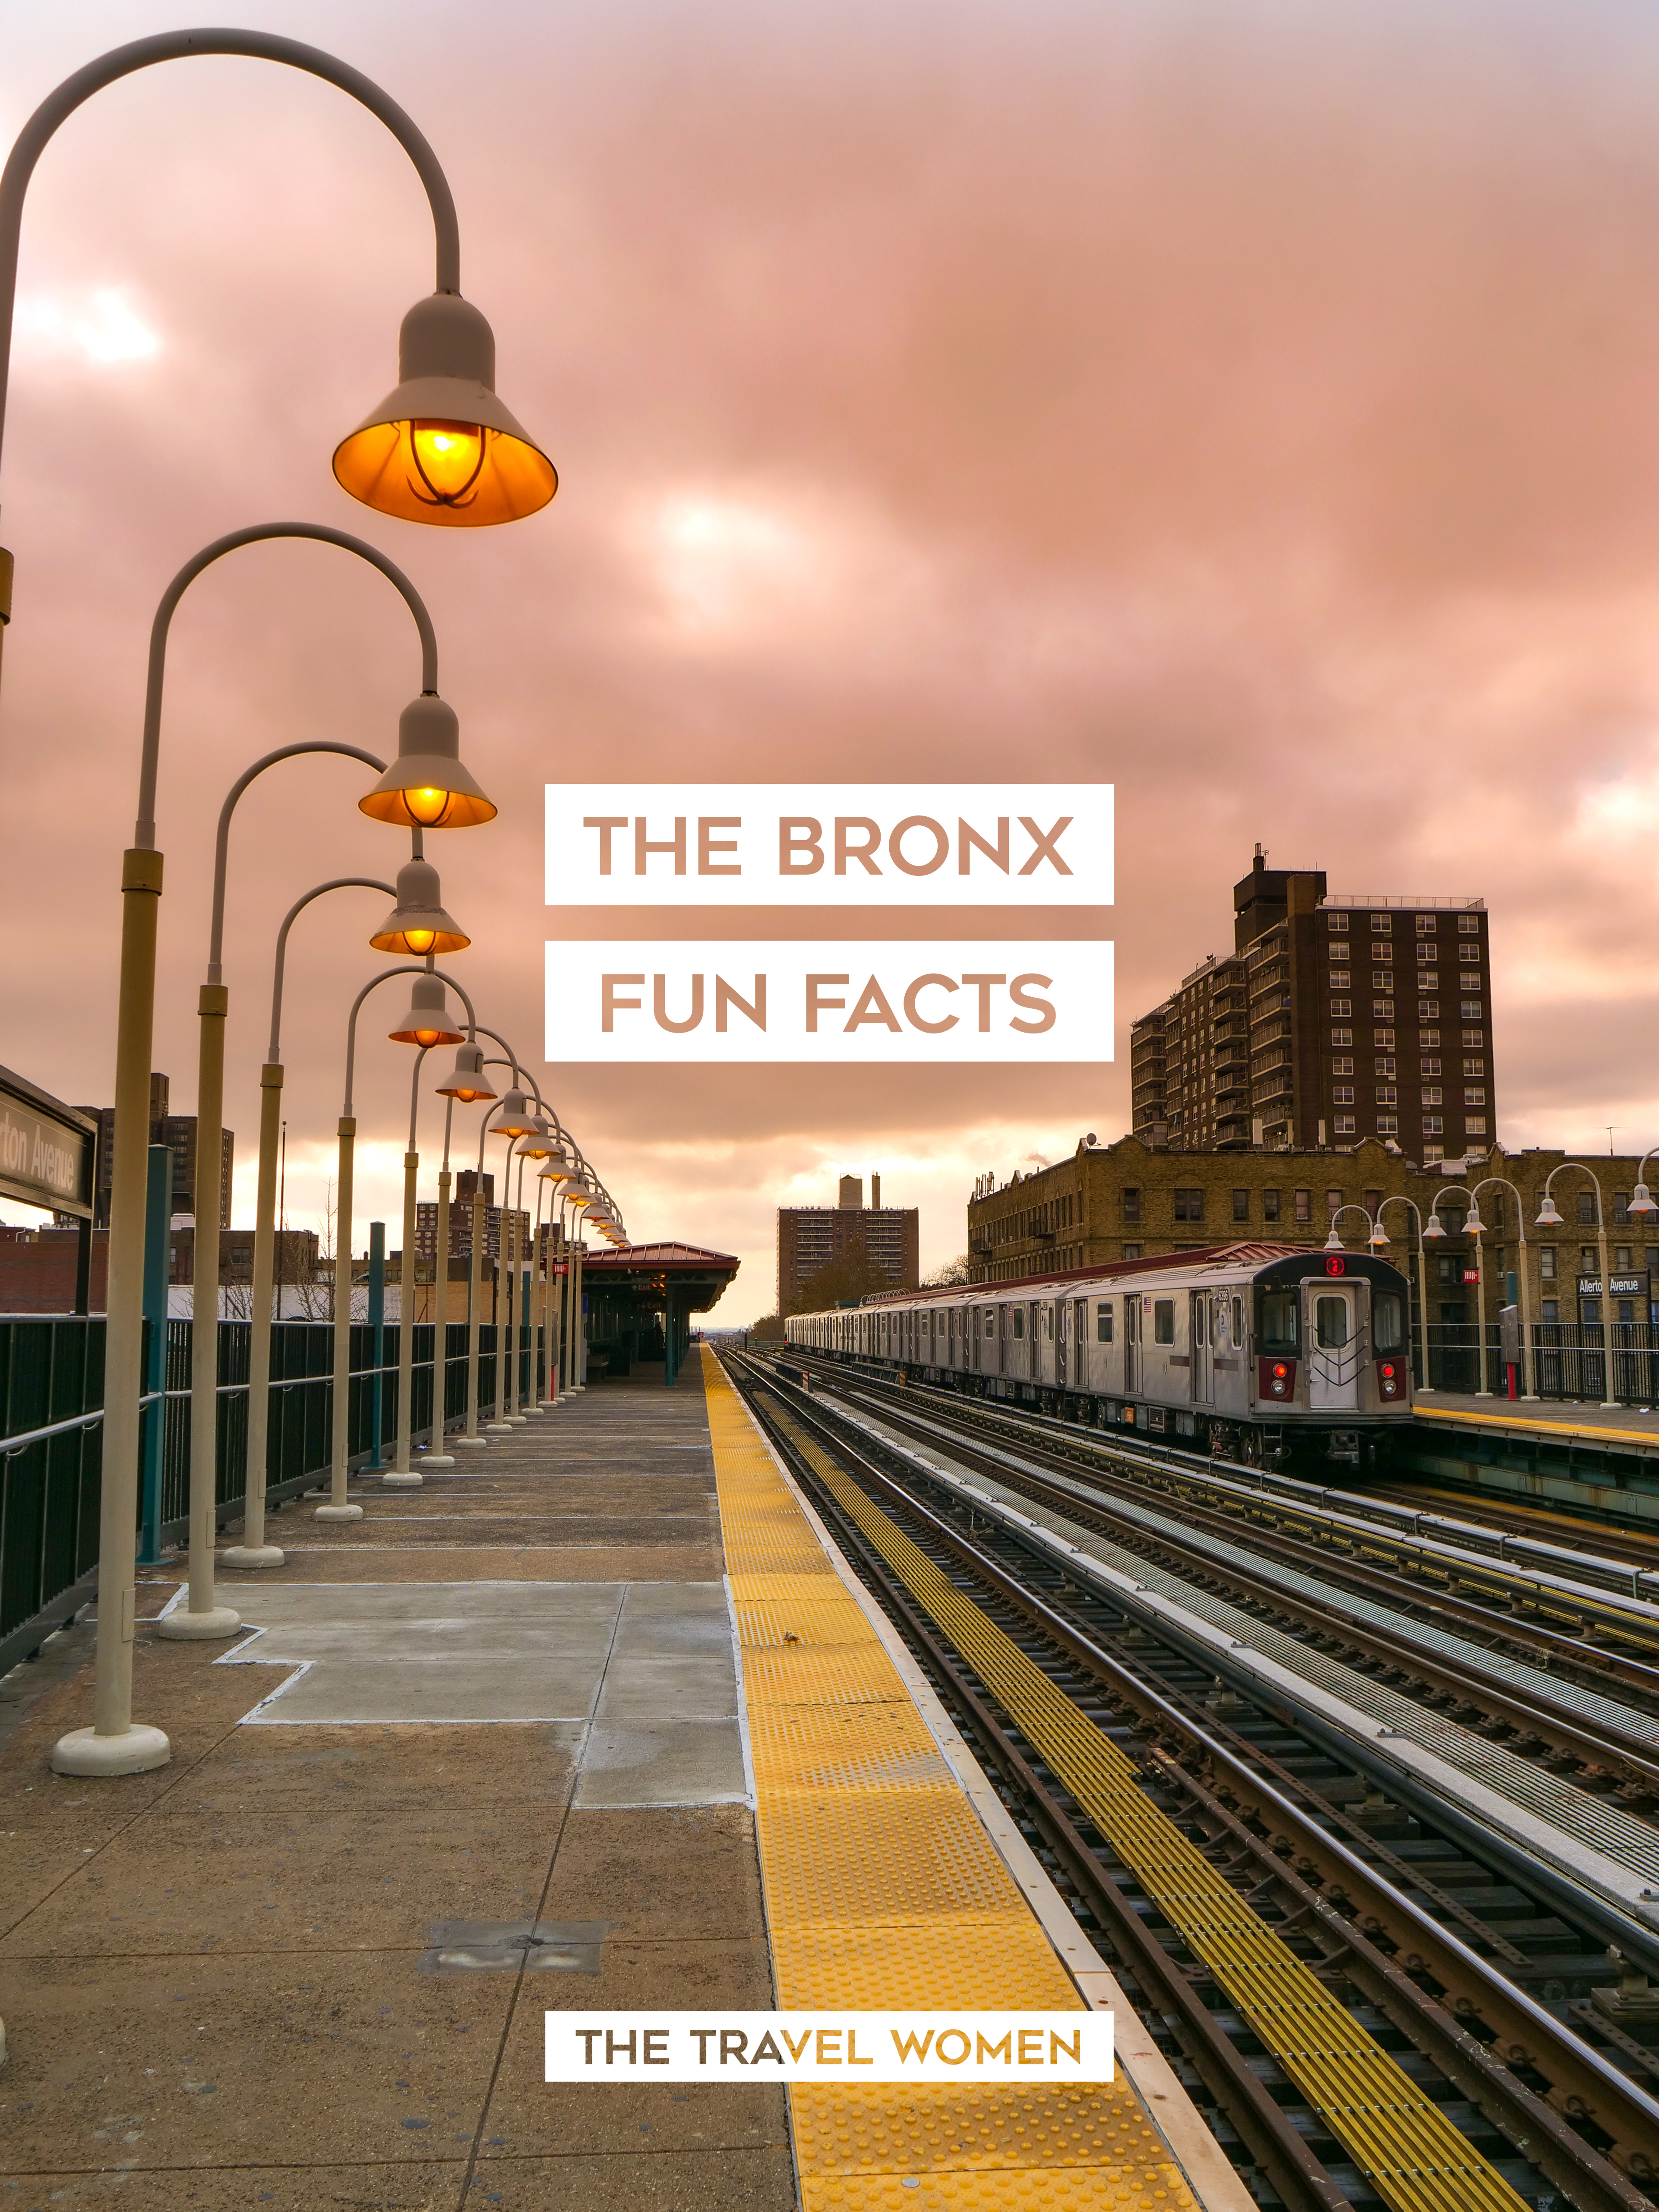 The Bronx Fun Facts History things you don't know elevated subway train sunset pink clouds